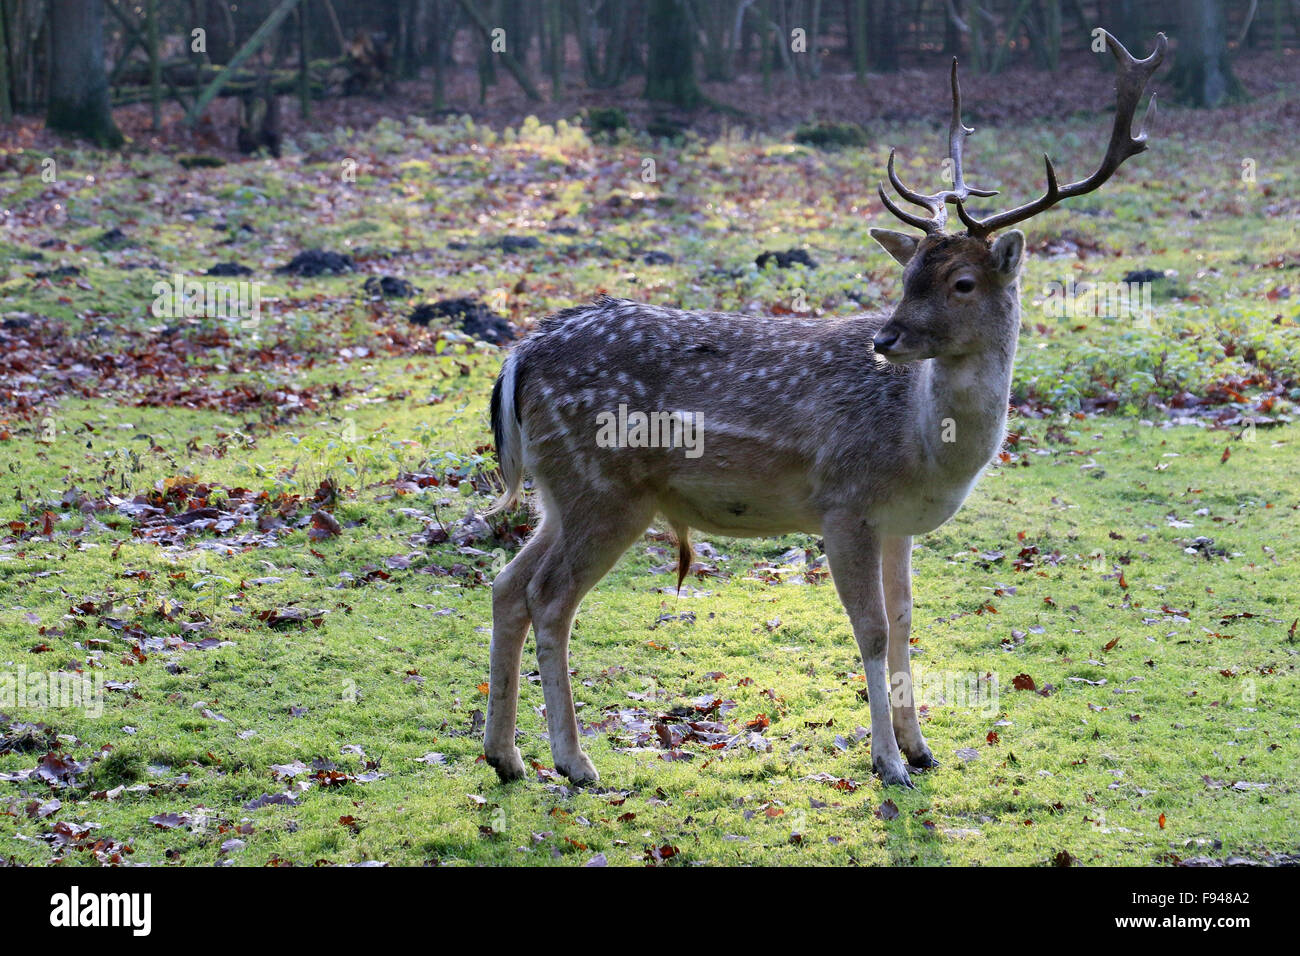 Shy deer in the open on grassland near a forest Stock Photo